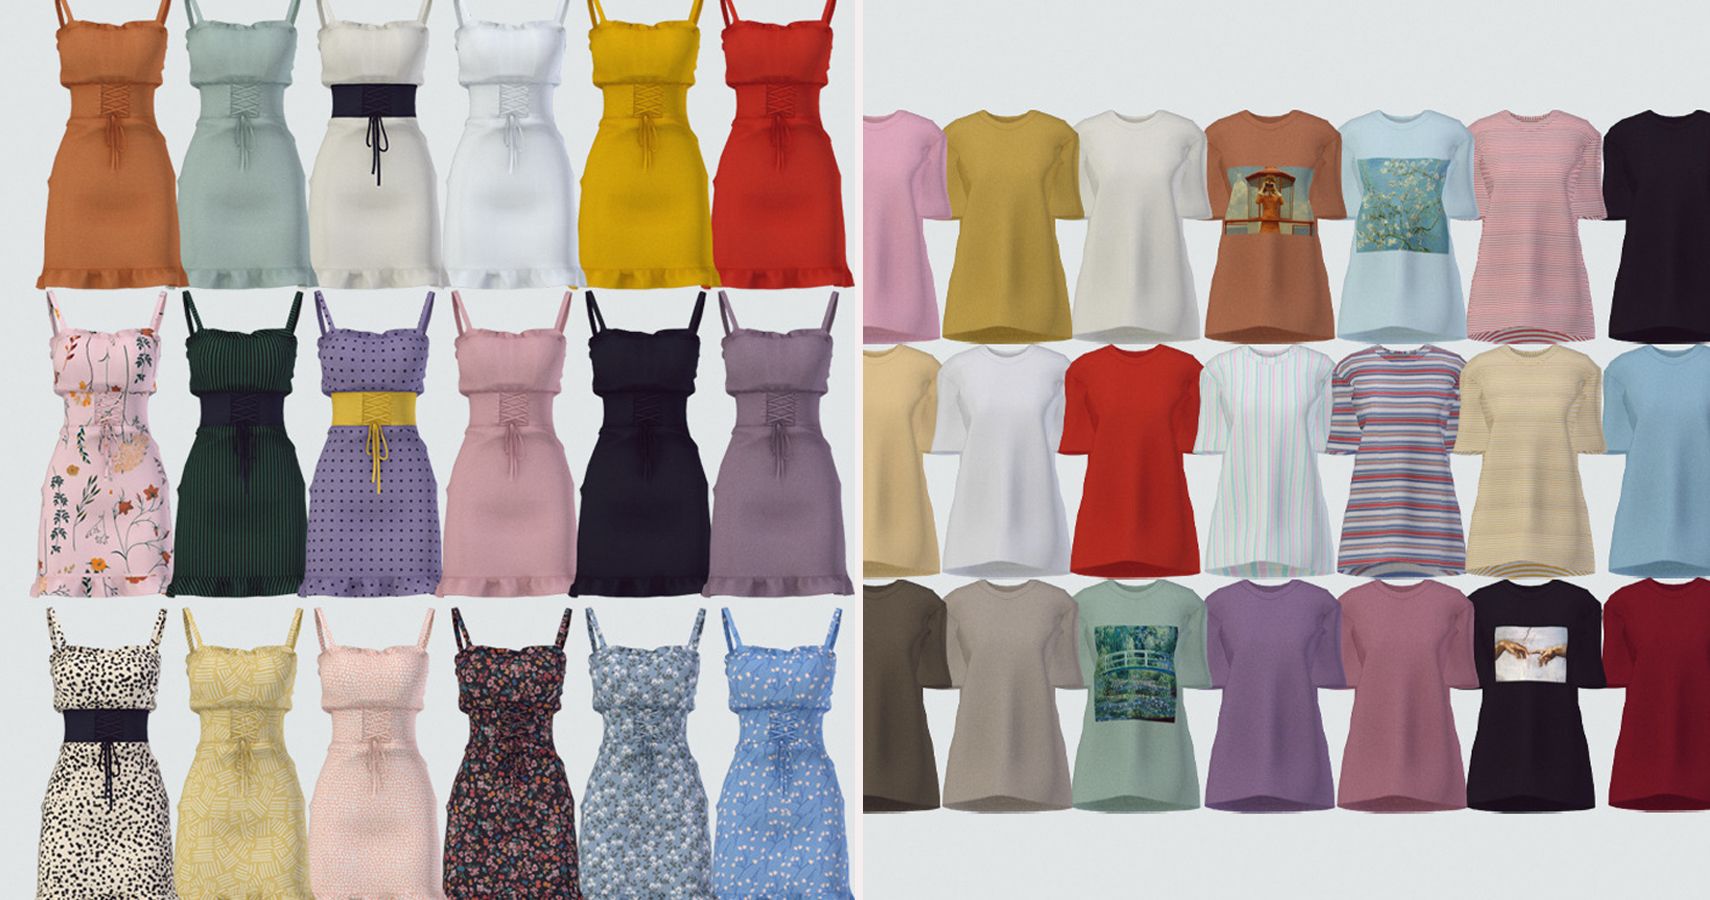 Left side a number of dresses of different colors. Right side three rows of multicolored t-shirts.